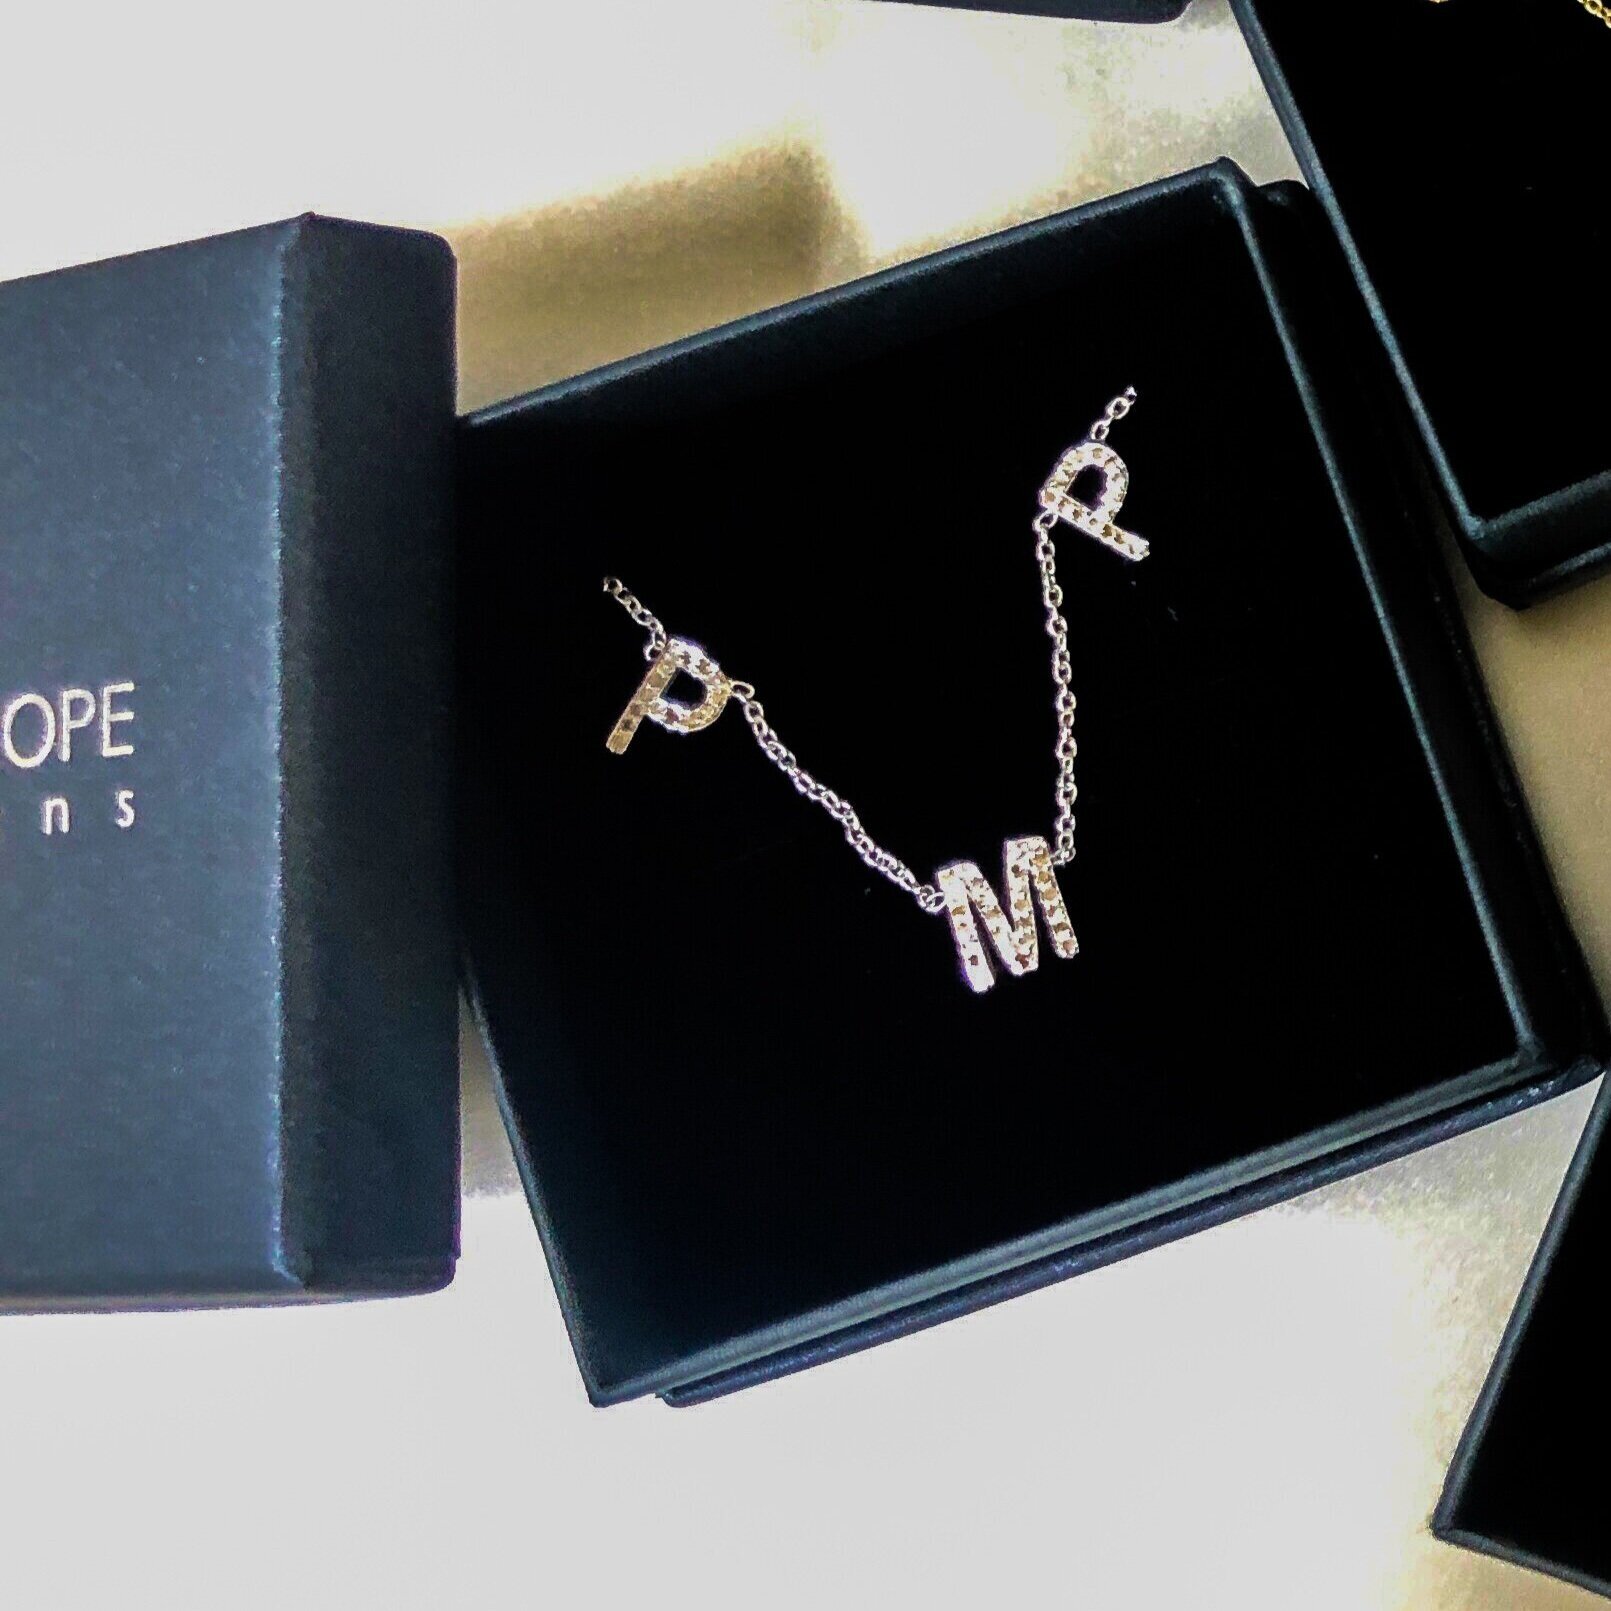 The best gift Kara has given recently: One of her initial necklaces to her friend Paige